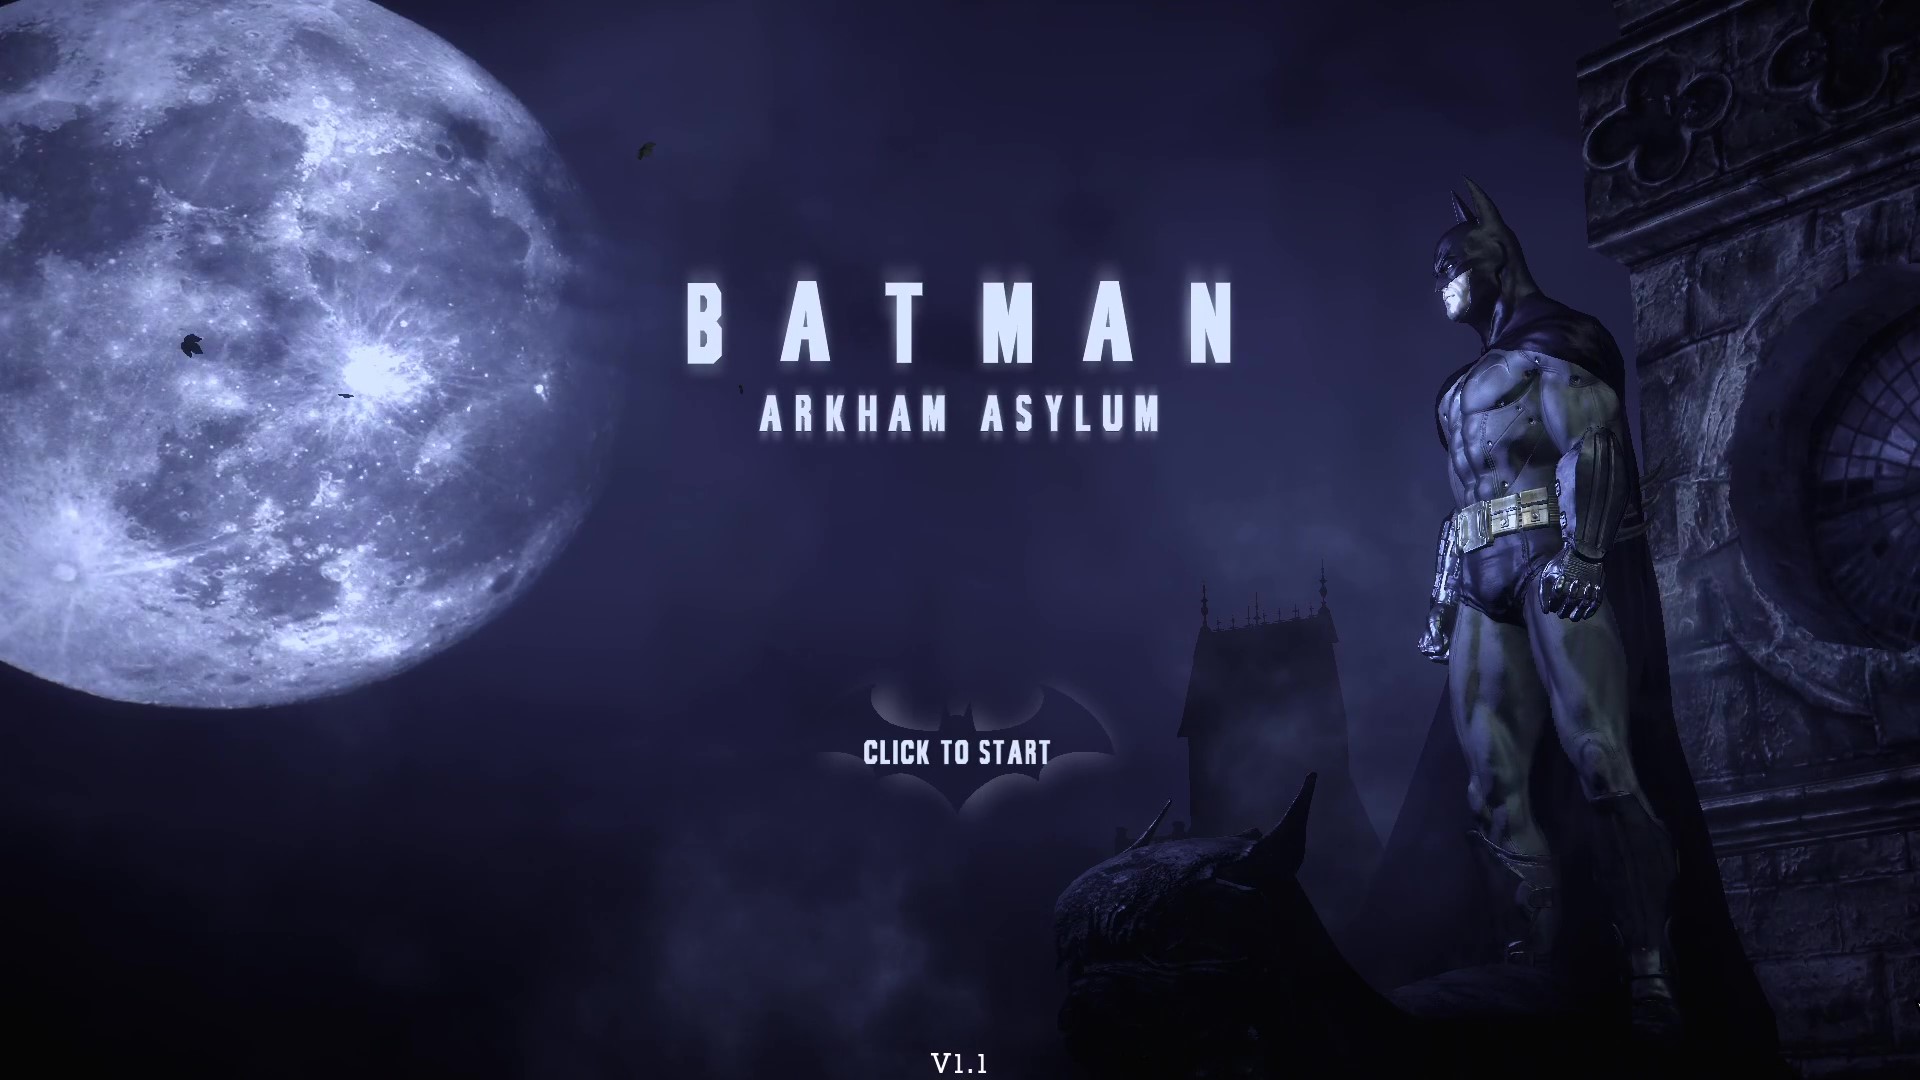 Pass The Controller: Does This Decade Old Batman Game Still Hold Up?